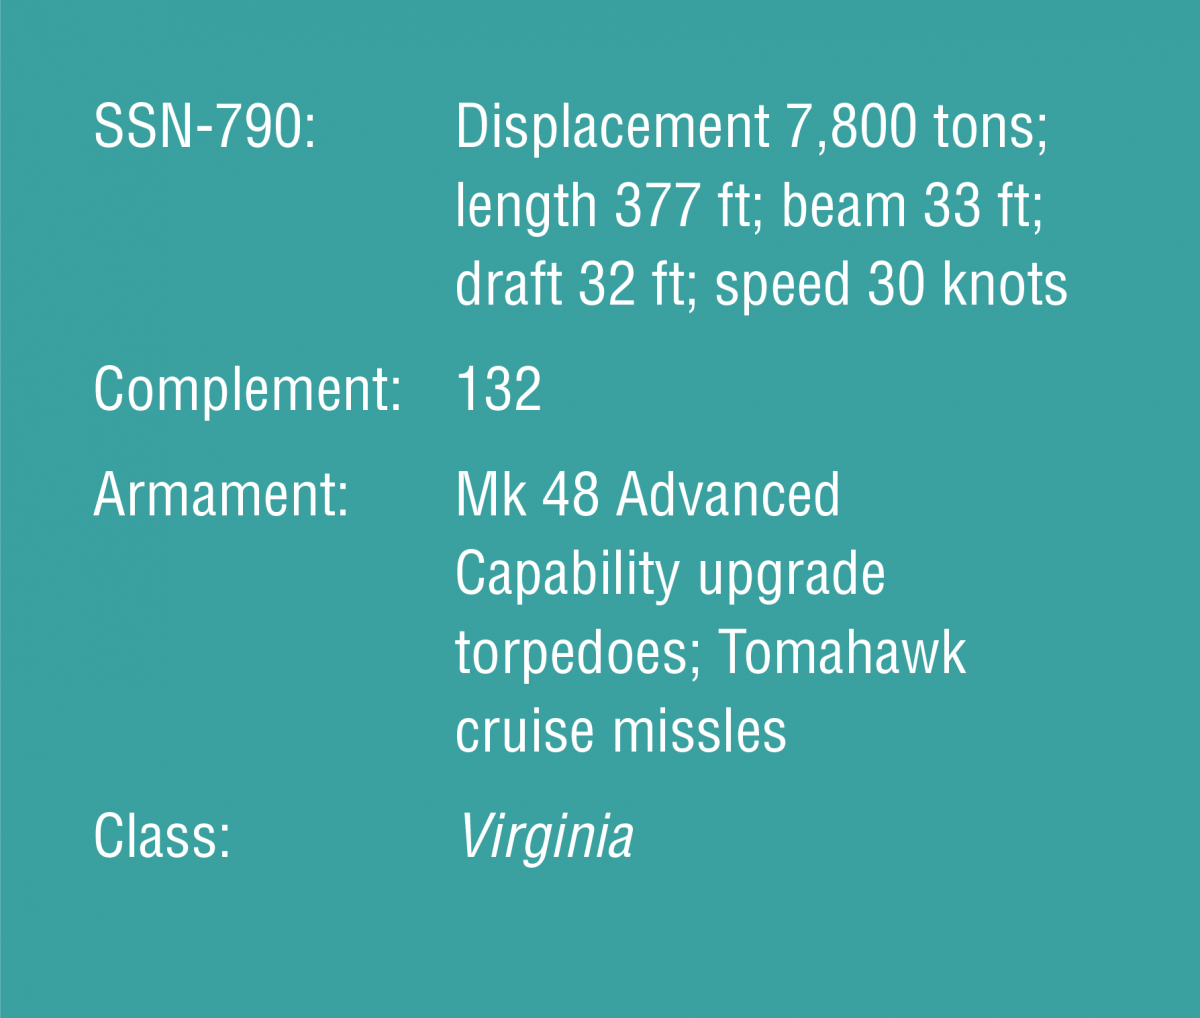 SSN-790: Displacement 7,800 tons; length 377 ft; beam 33 ft; draft 32 ft; speed 30 knots   Complement: 132  Armament: Mk 48 Advanced Capability upgrade torpedoes; Tomahawk cruise missles  Class: Virginia